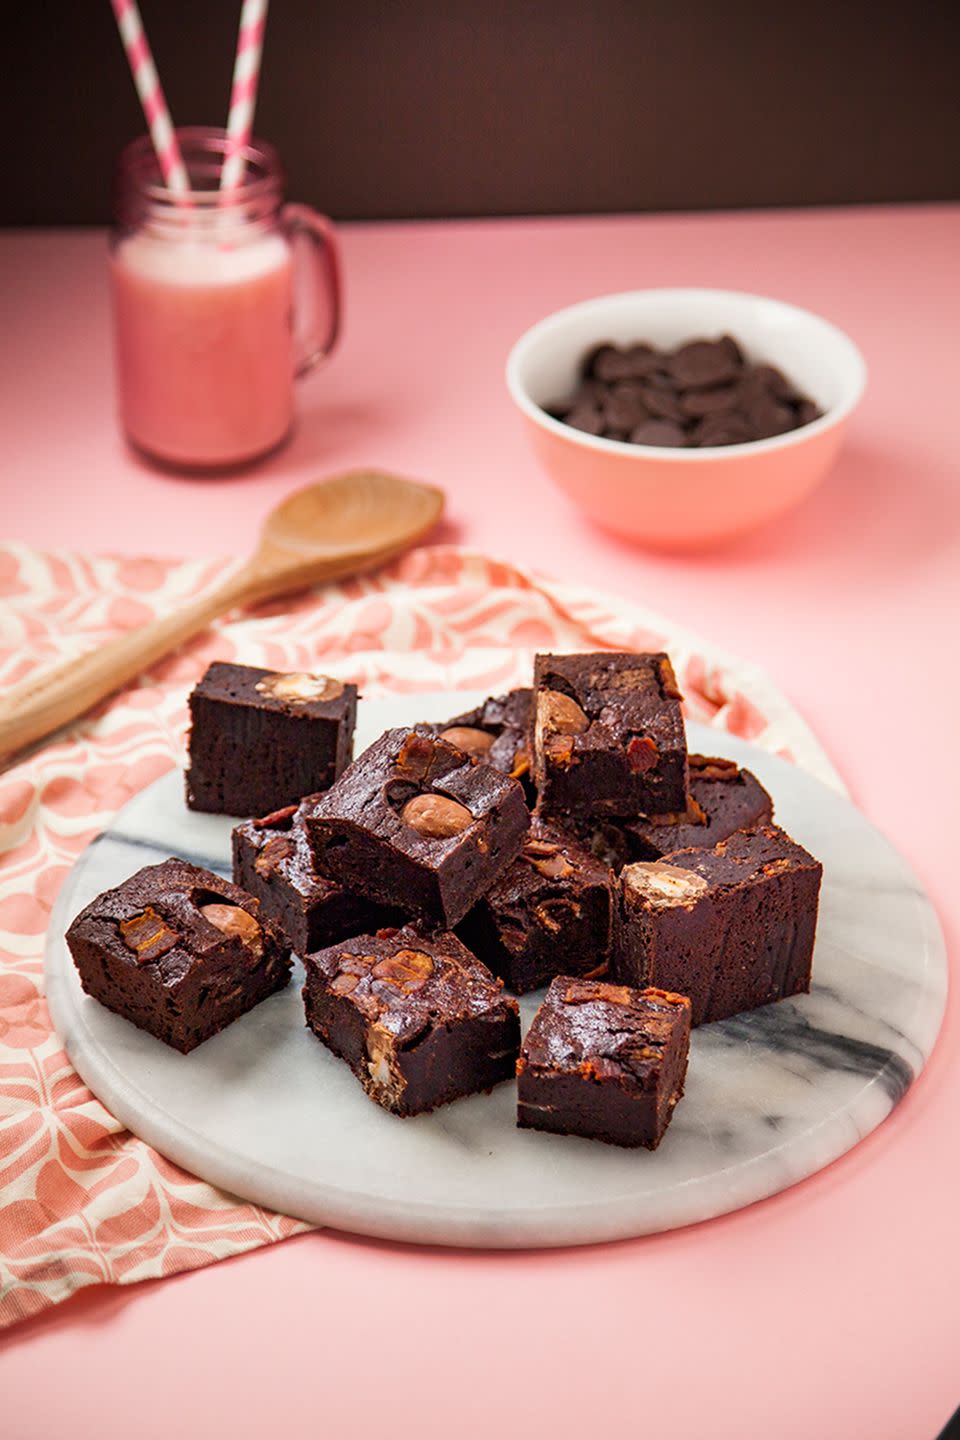 <p>Brunch brownies?! The saltiness of the bacon and the sugary sweet Creme Egg makes for the perfect chocolate brownie combination.</p><p><strong>Recipe: <a href="https://www.goodhousekeeping.com/uk/food/recipes/a26585958/bacon-creme-egg-brownies/" rel="nofollow noopener" target="_blank" data-ylk="slk:Bacon and creme egg chocolate brownies" class="link ">Bacon and creme egg chocolate brownies</a></strong></p>